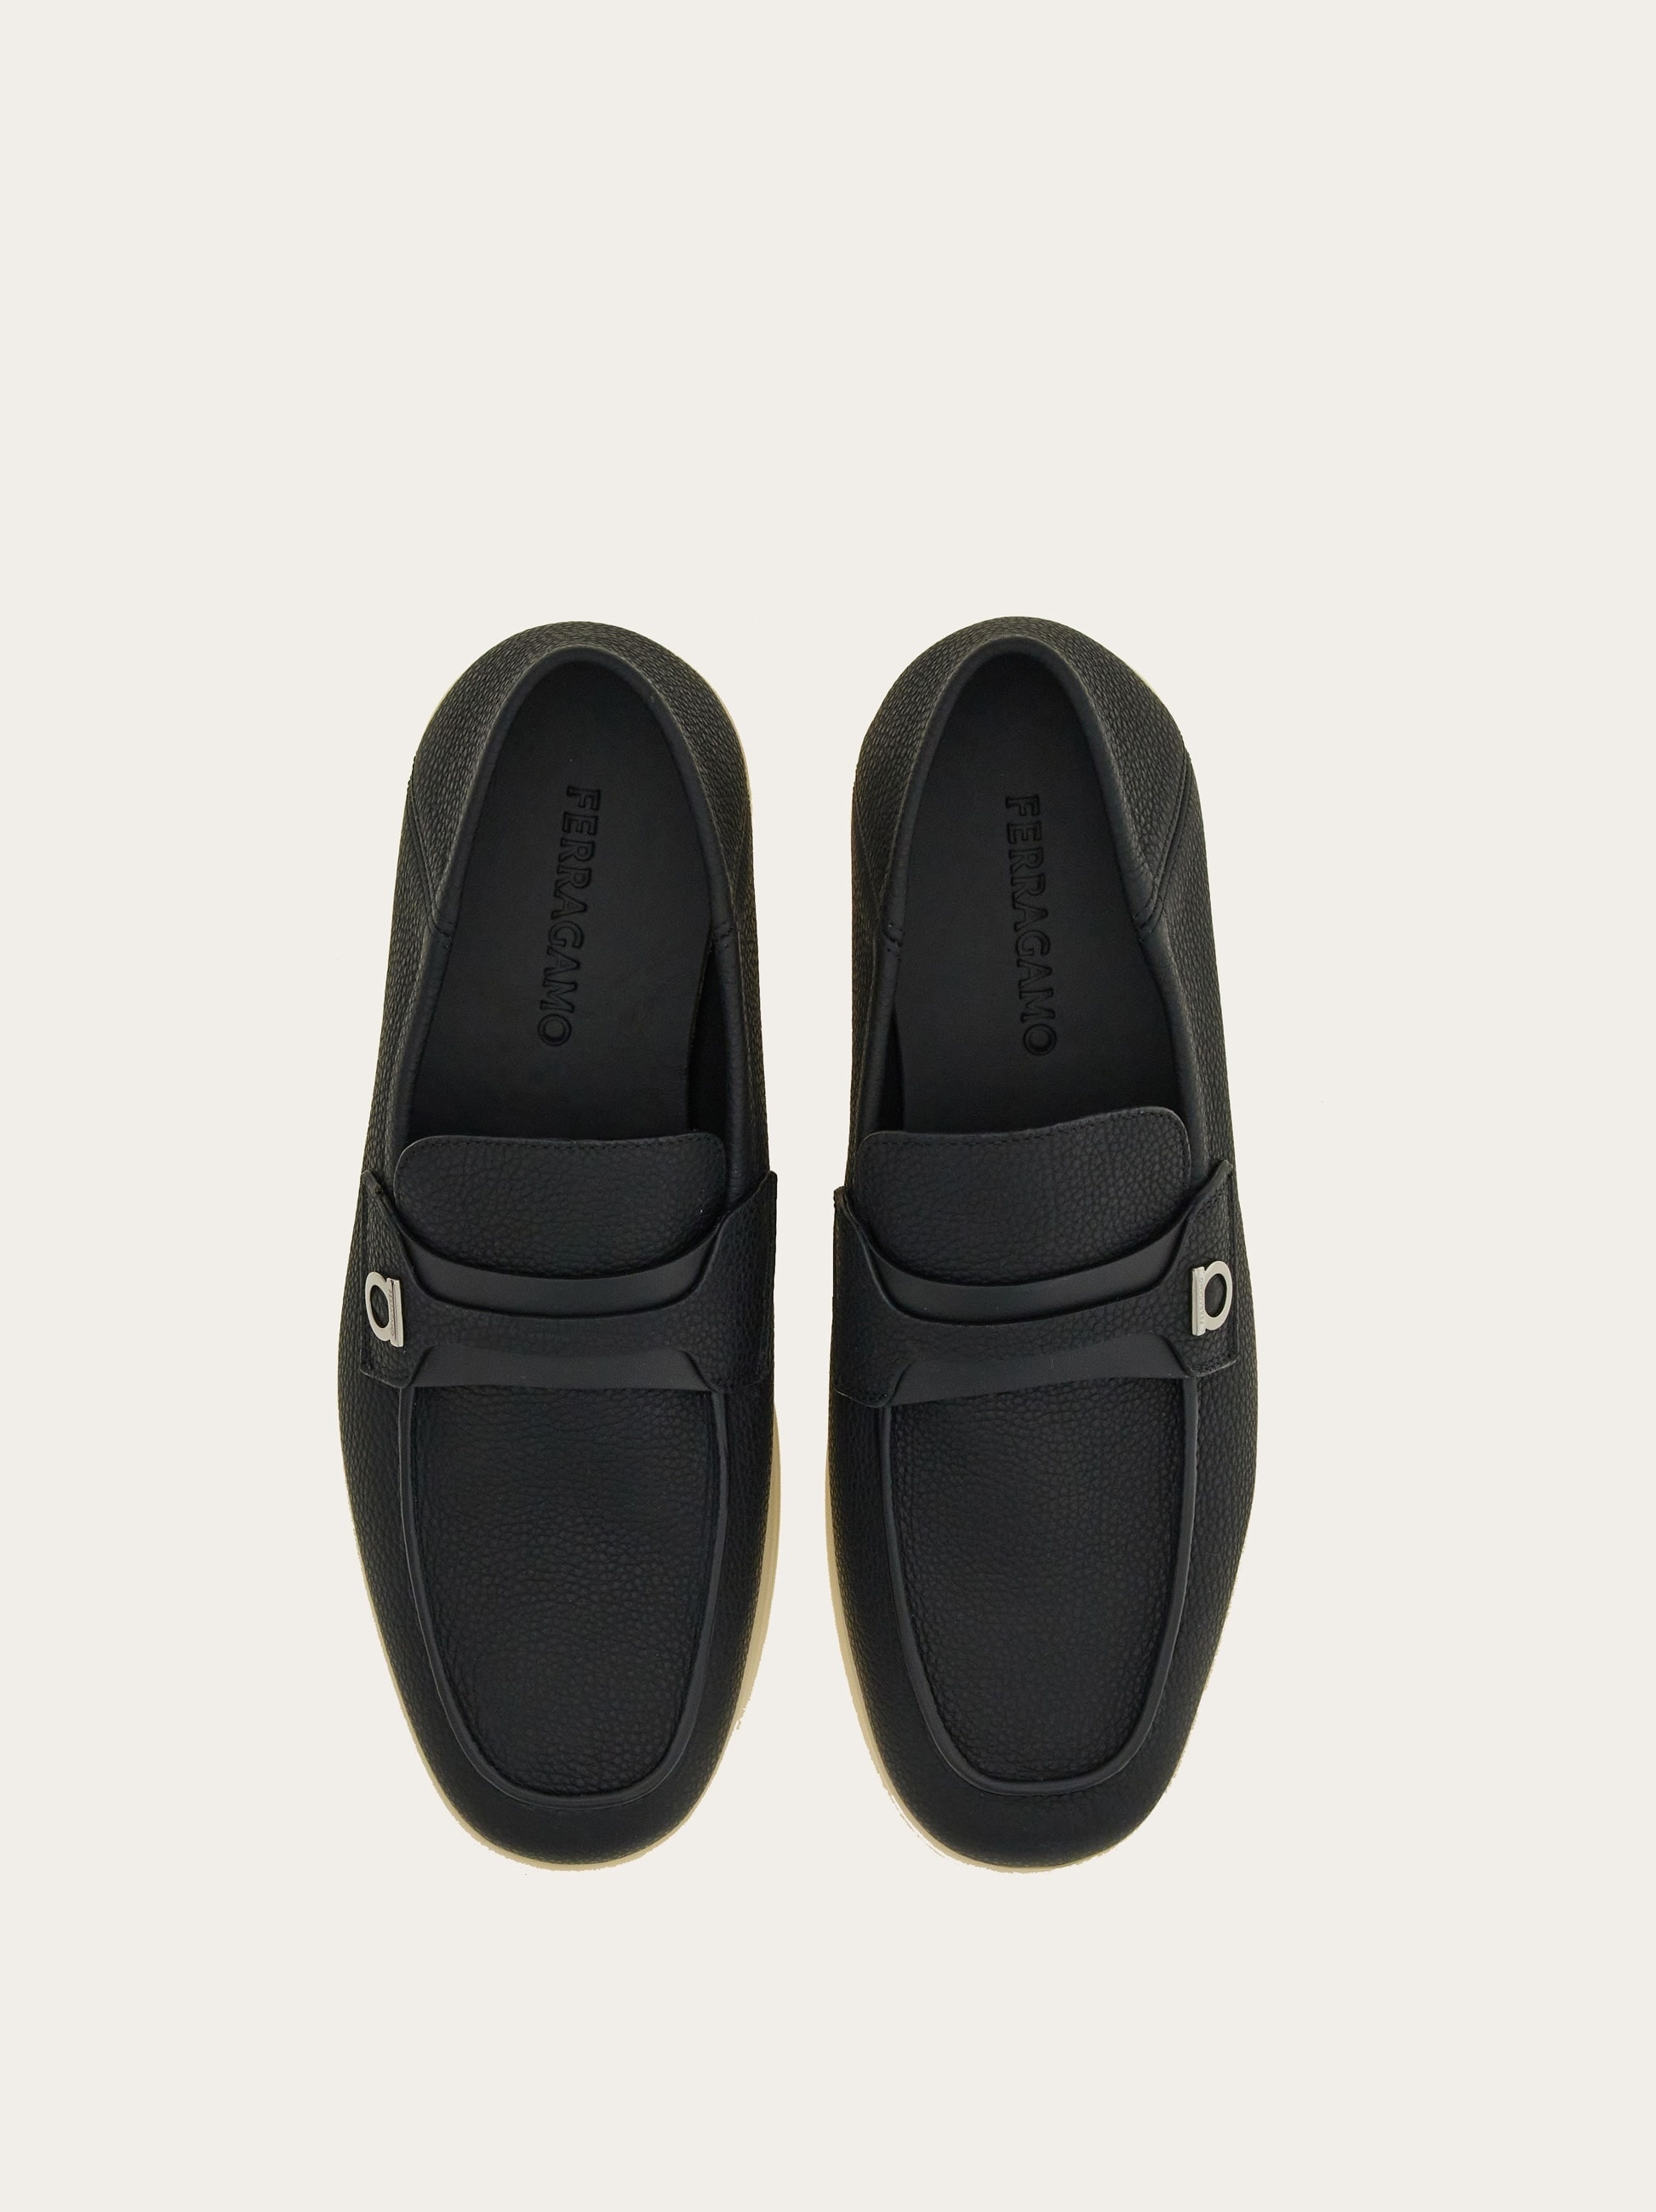 Deconstructed loafer with Gancini ornament - 2